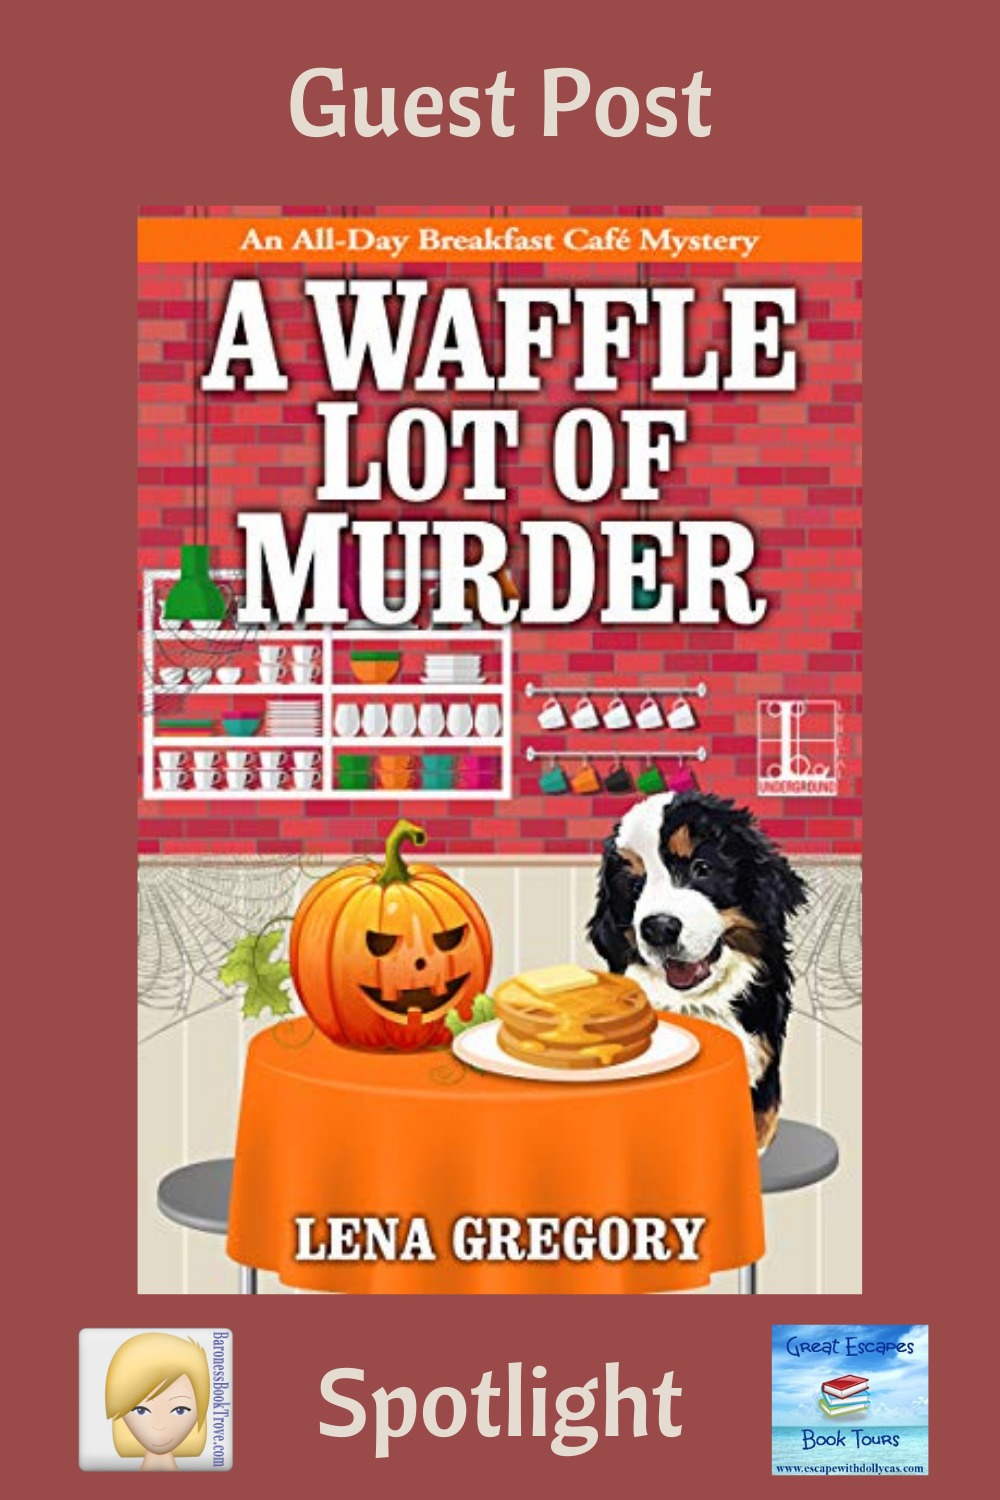 A Waffle Lot of Murder